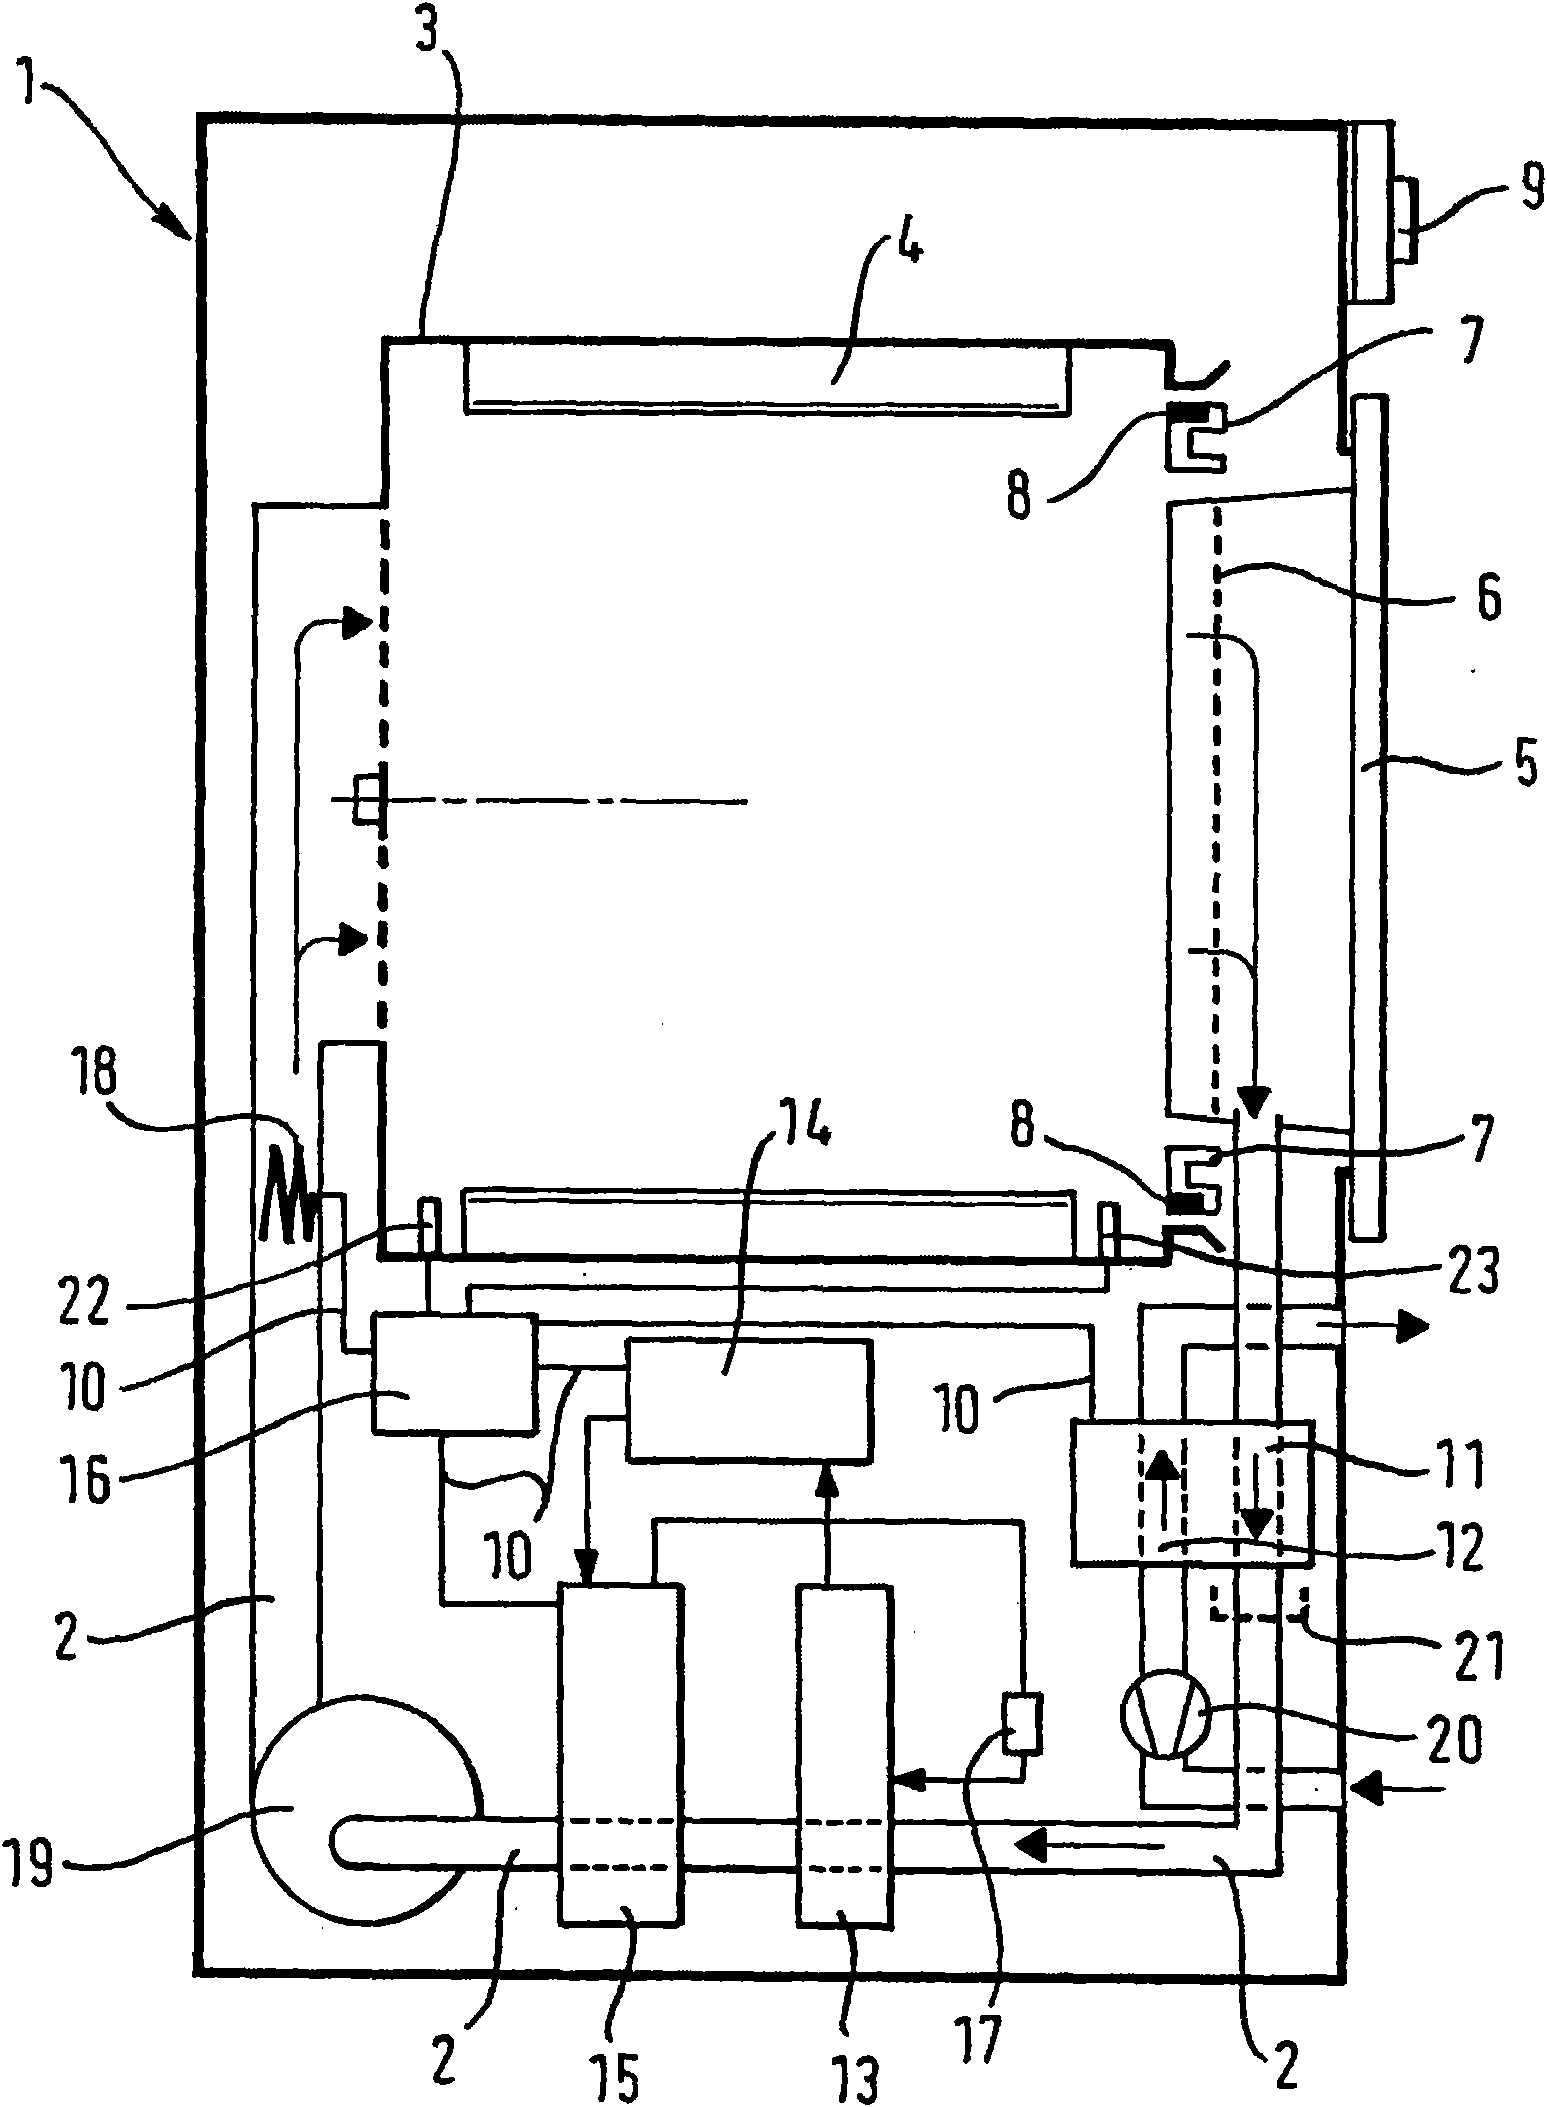 Method for operating a condenser tumble-dryer comprising a thermal pump and a condenser tumble dryer that is suitable for said method